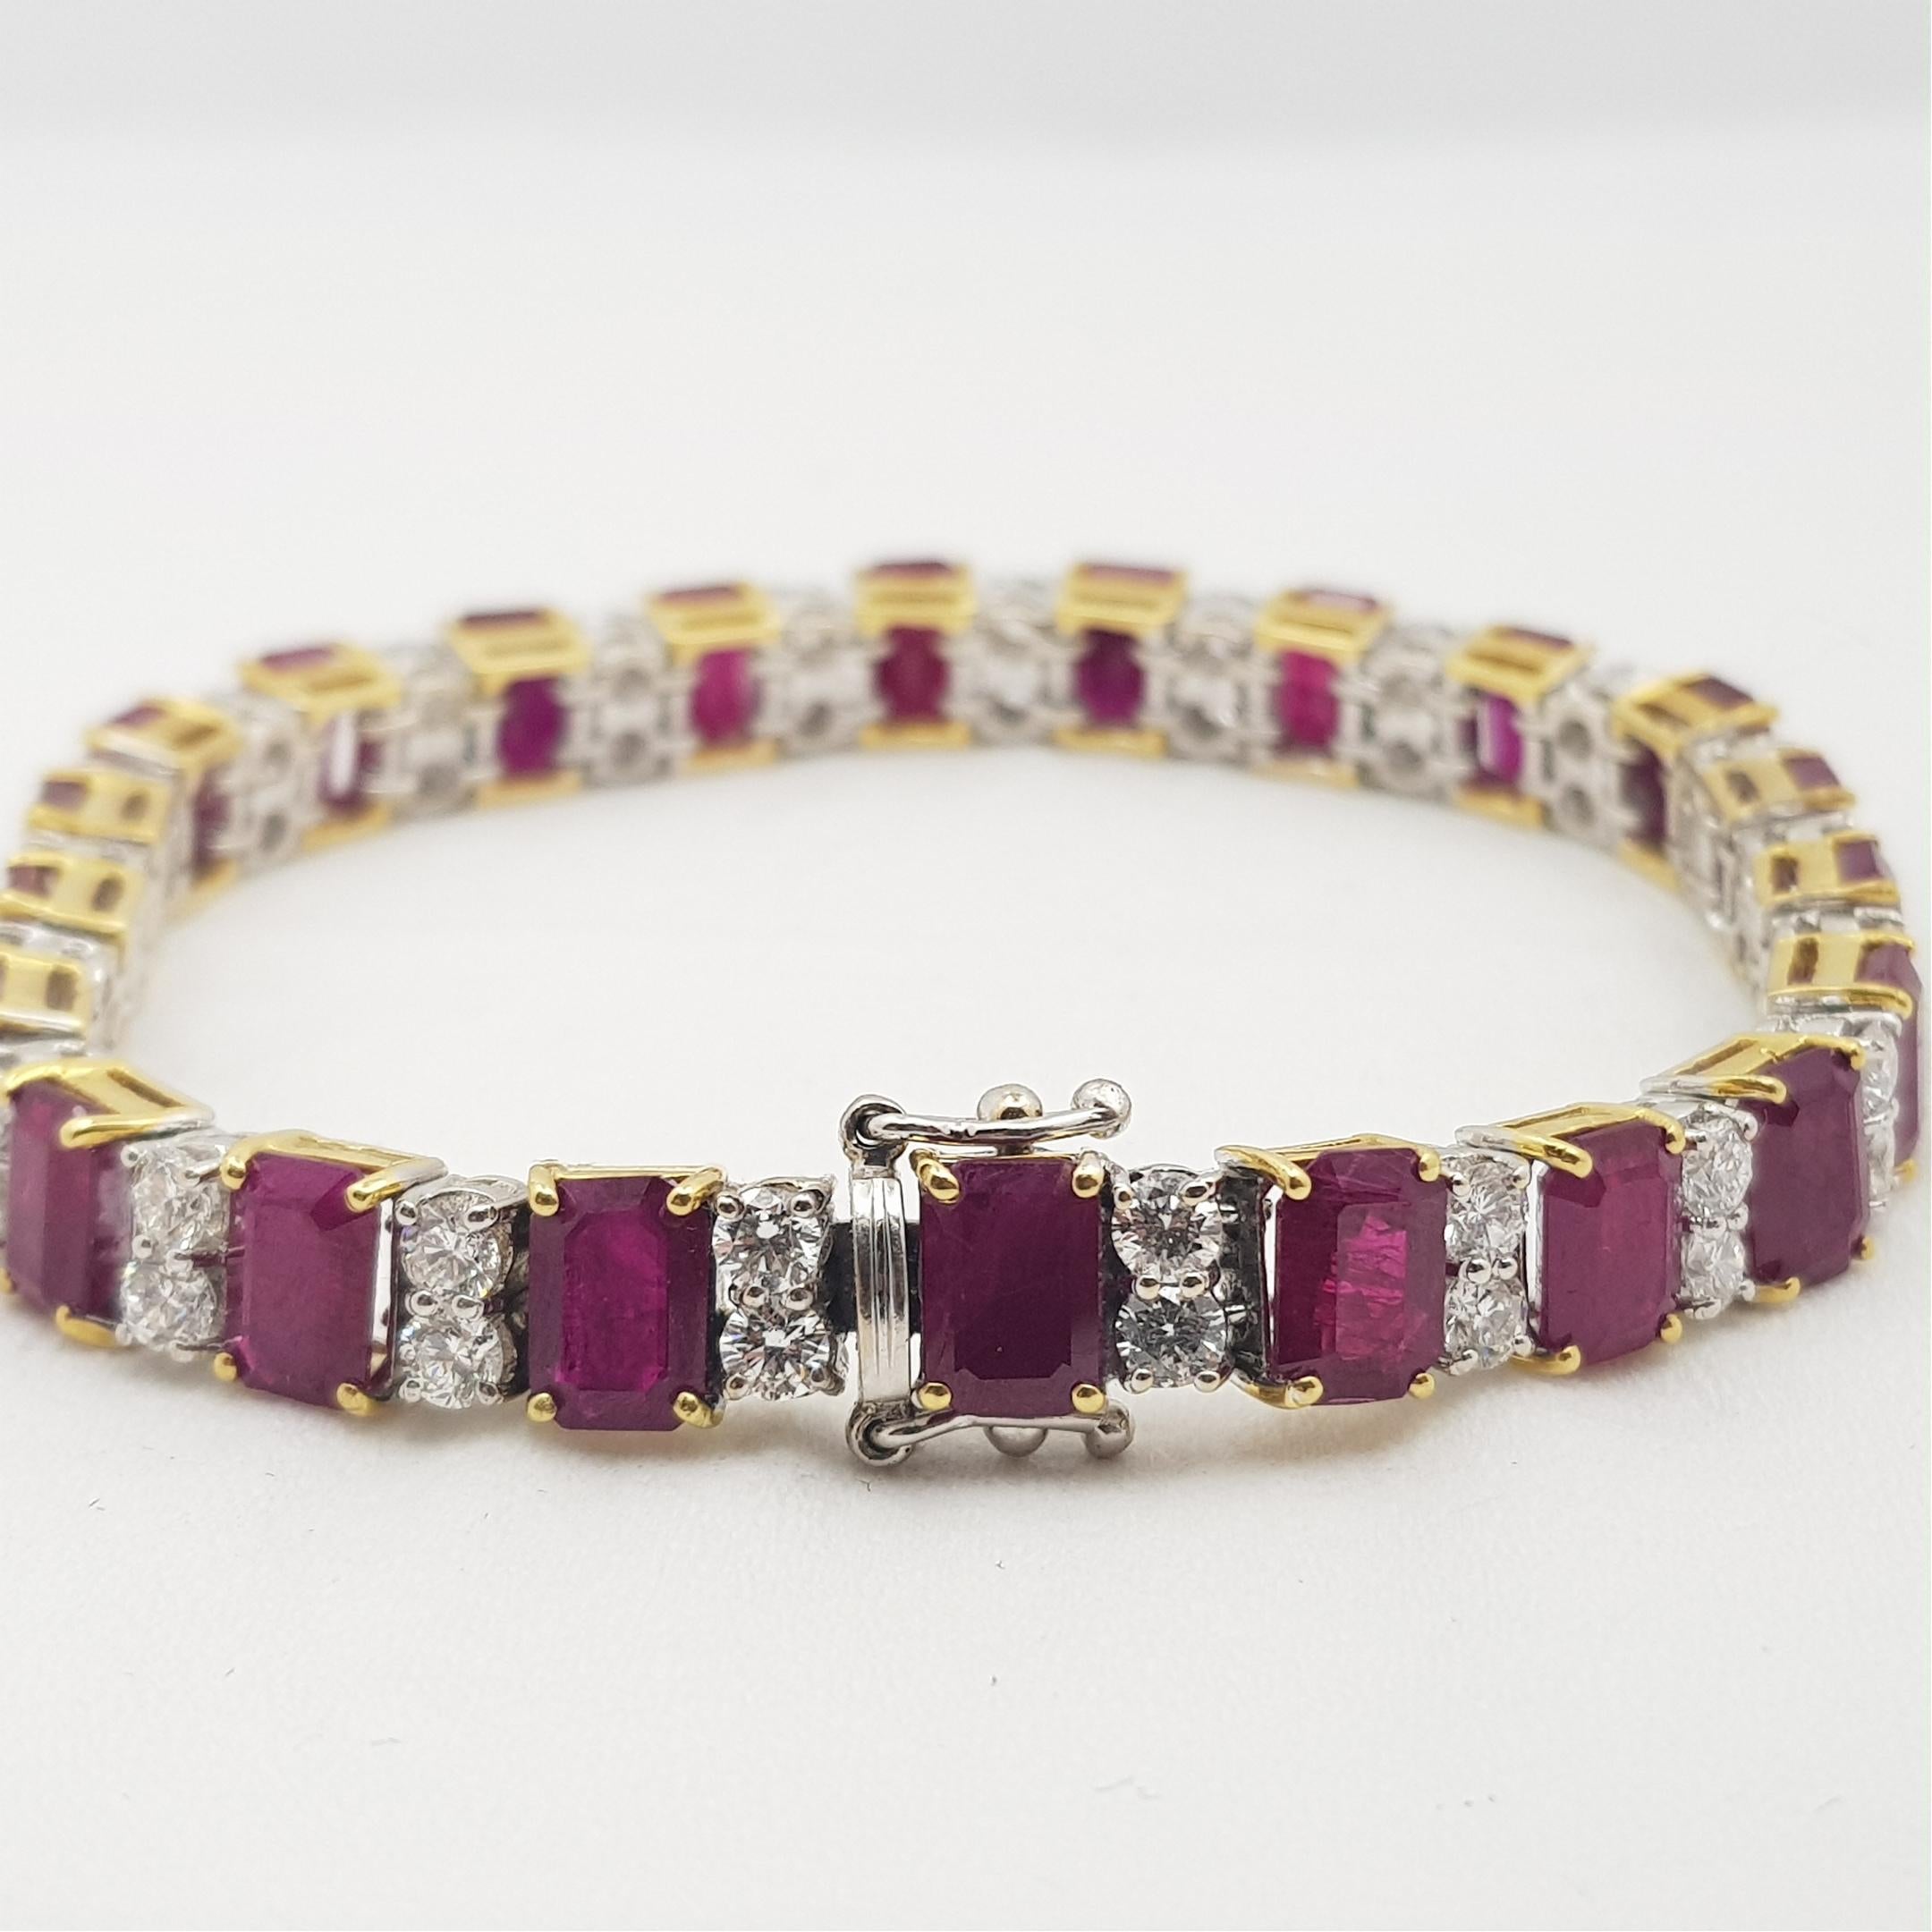 18ct Two Tone Gold Burmese Ruby & 4.5ct TW Diamond Bracelet Val $62765 AUD For Sale 3